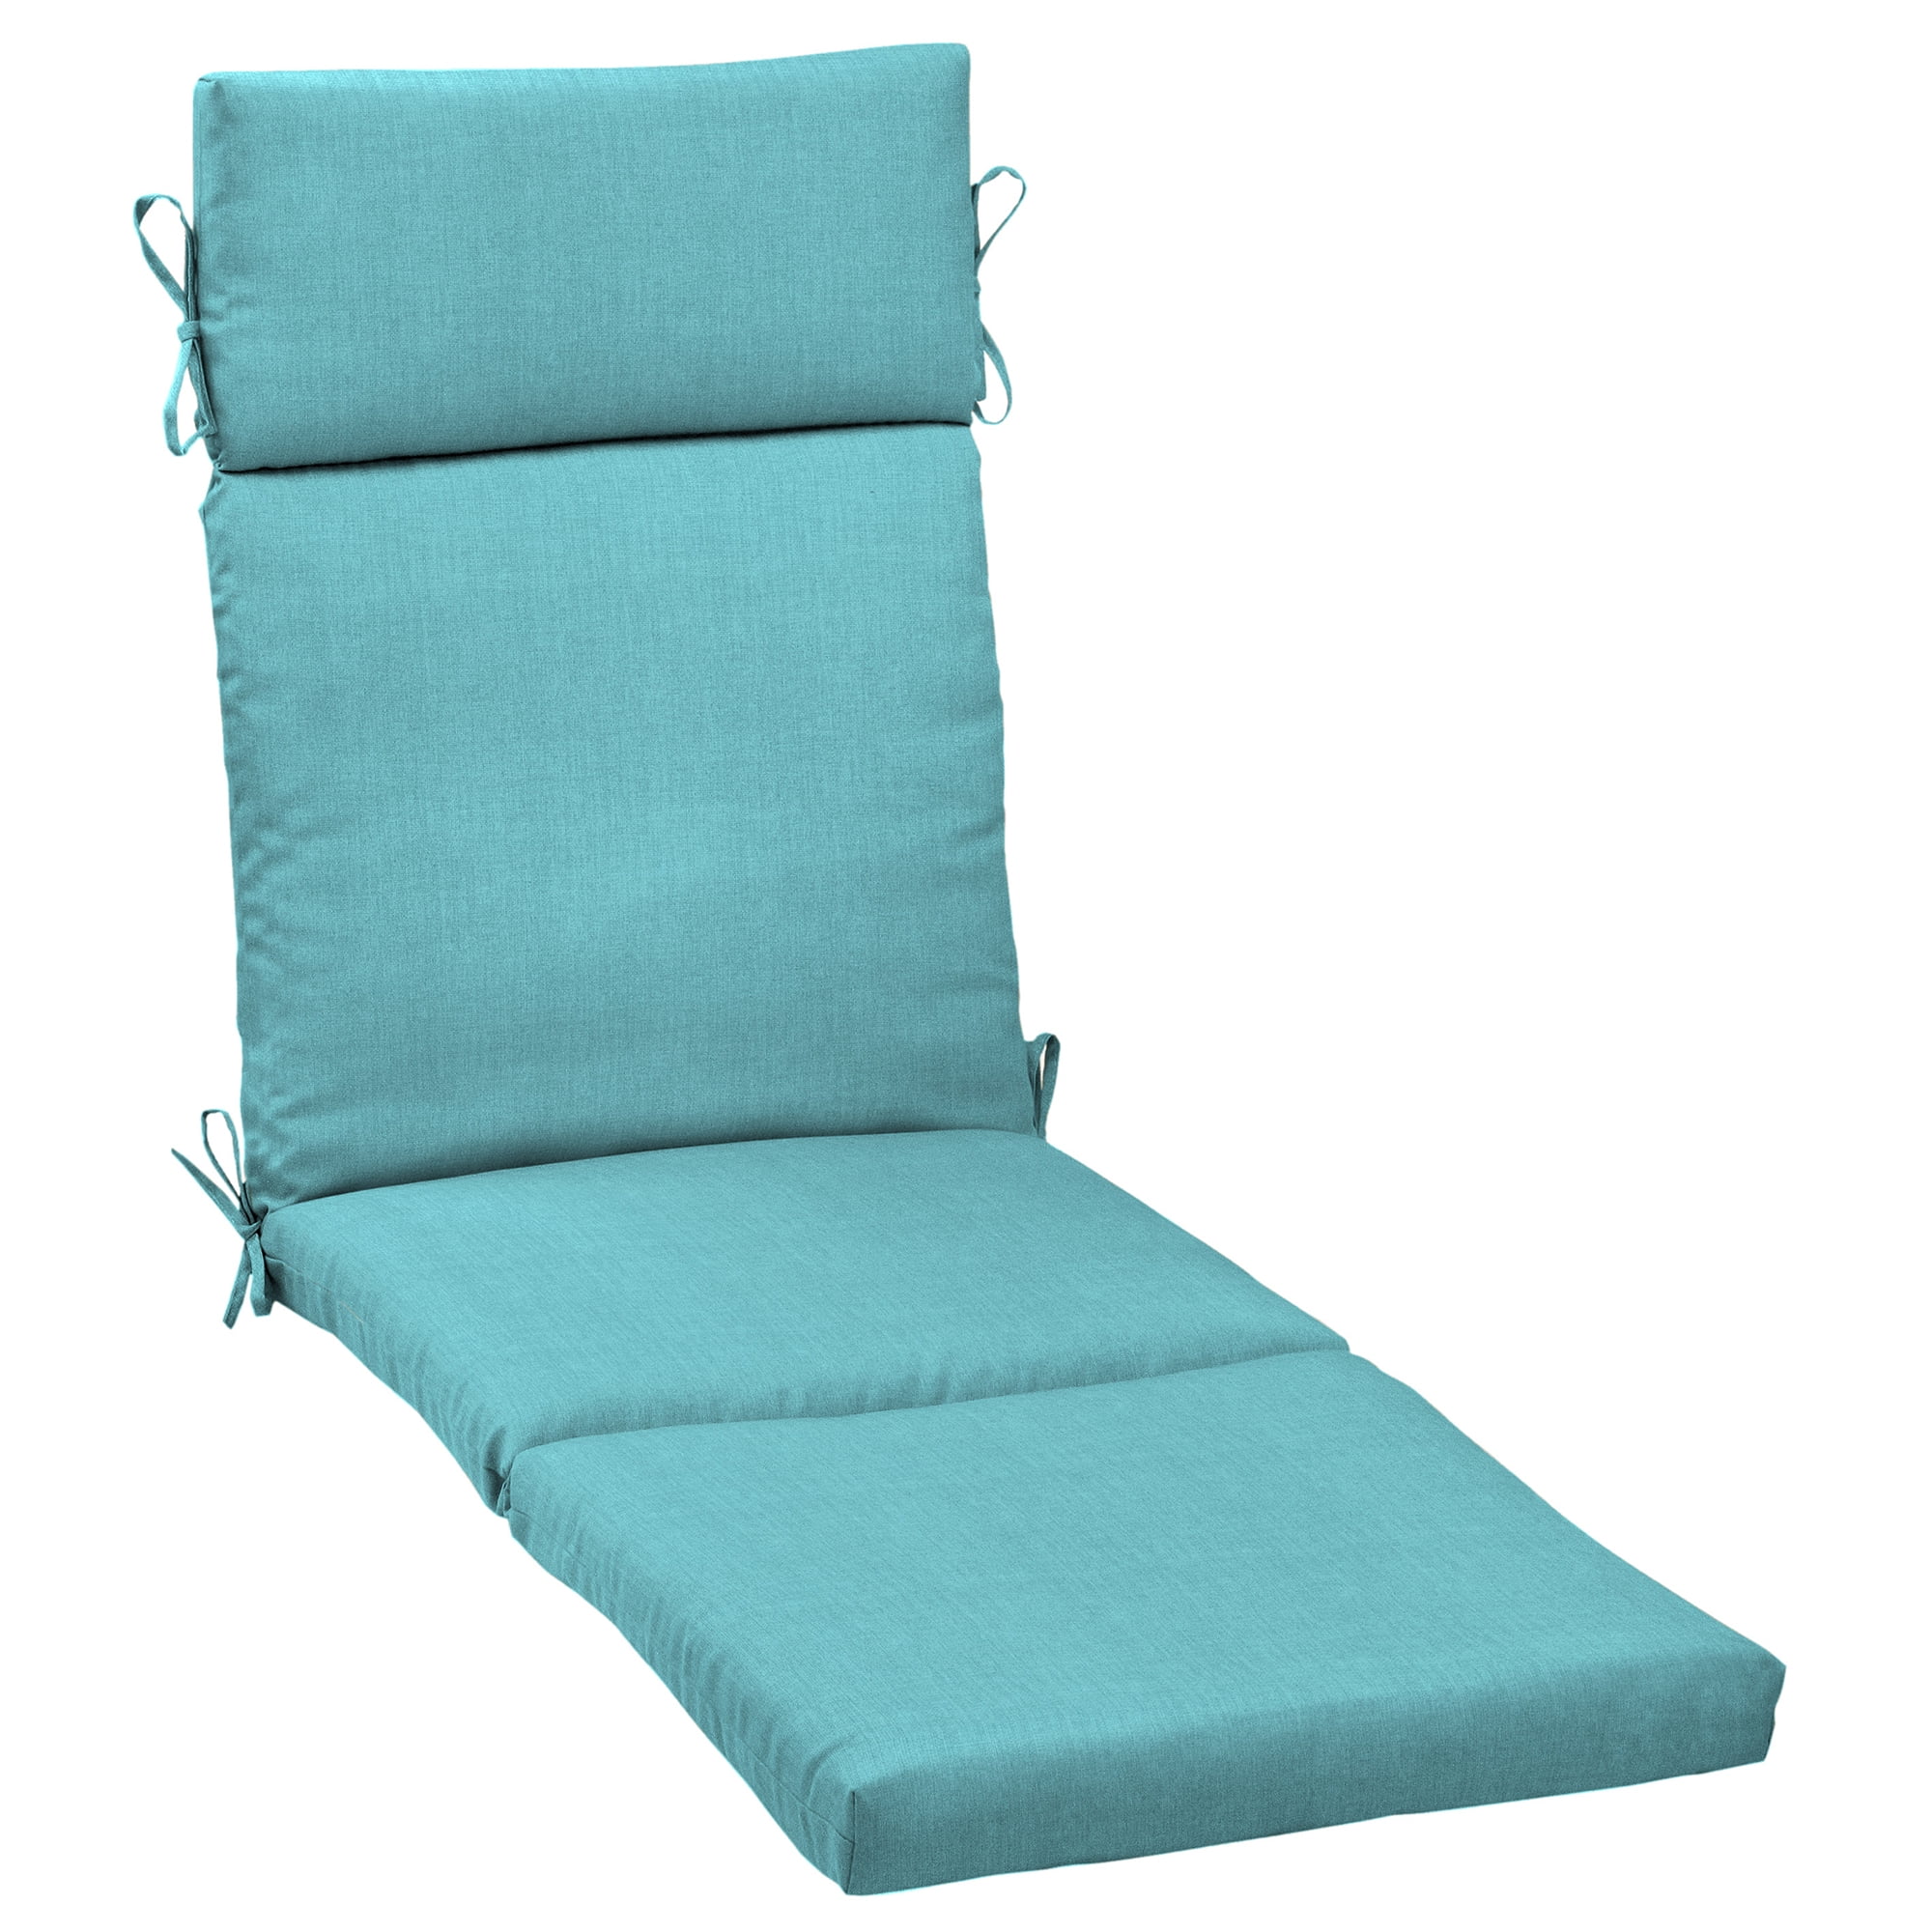 Sale > cushions for a chaise lounge > in stock